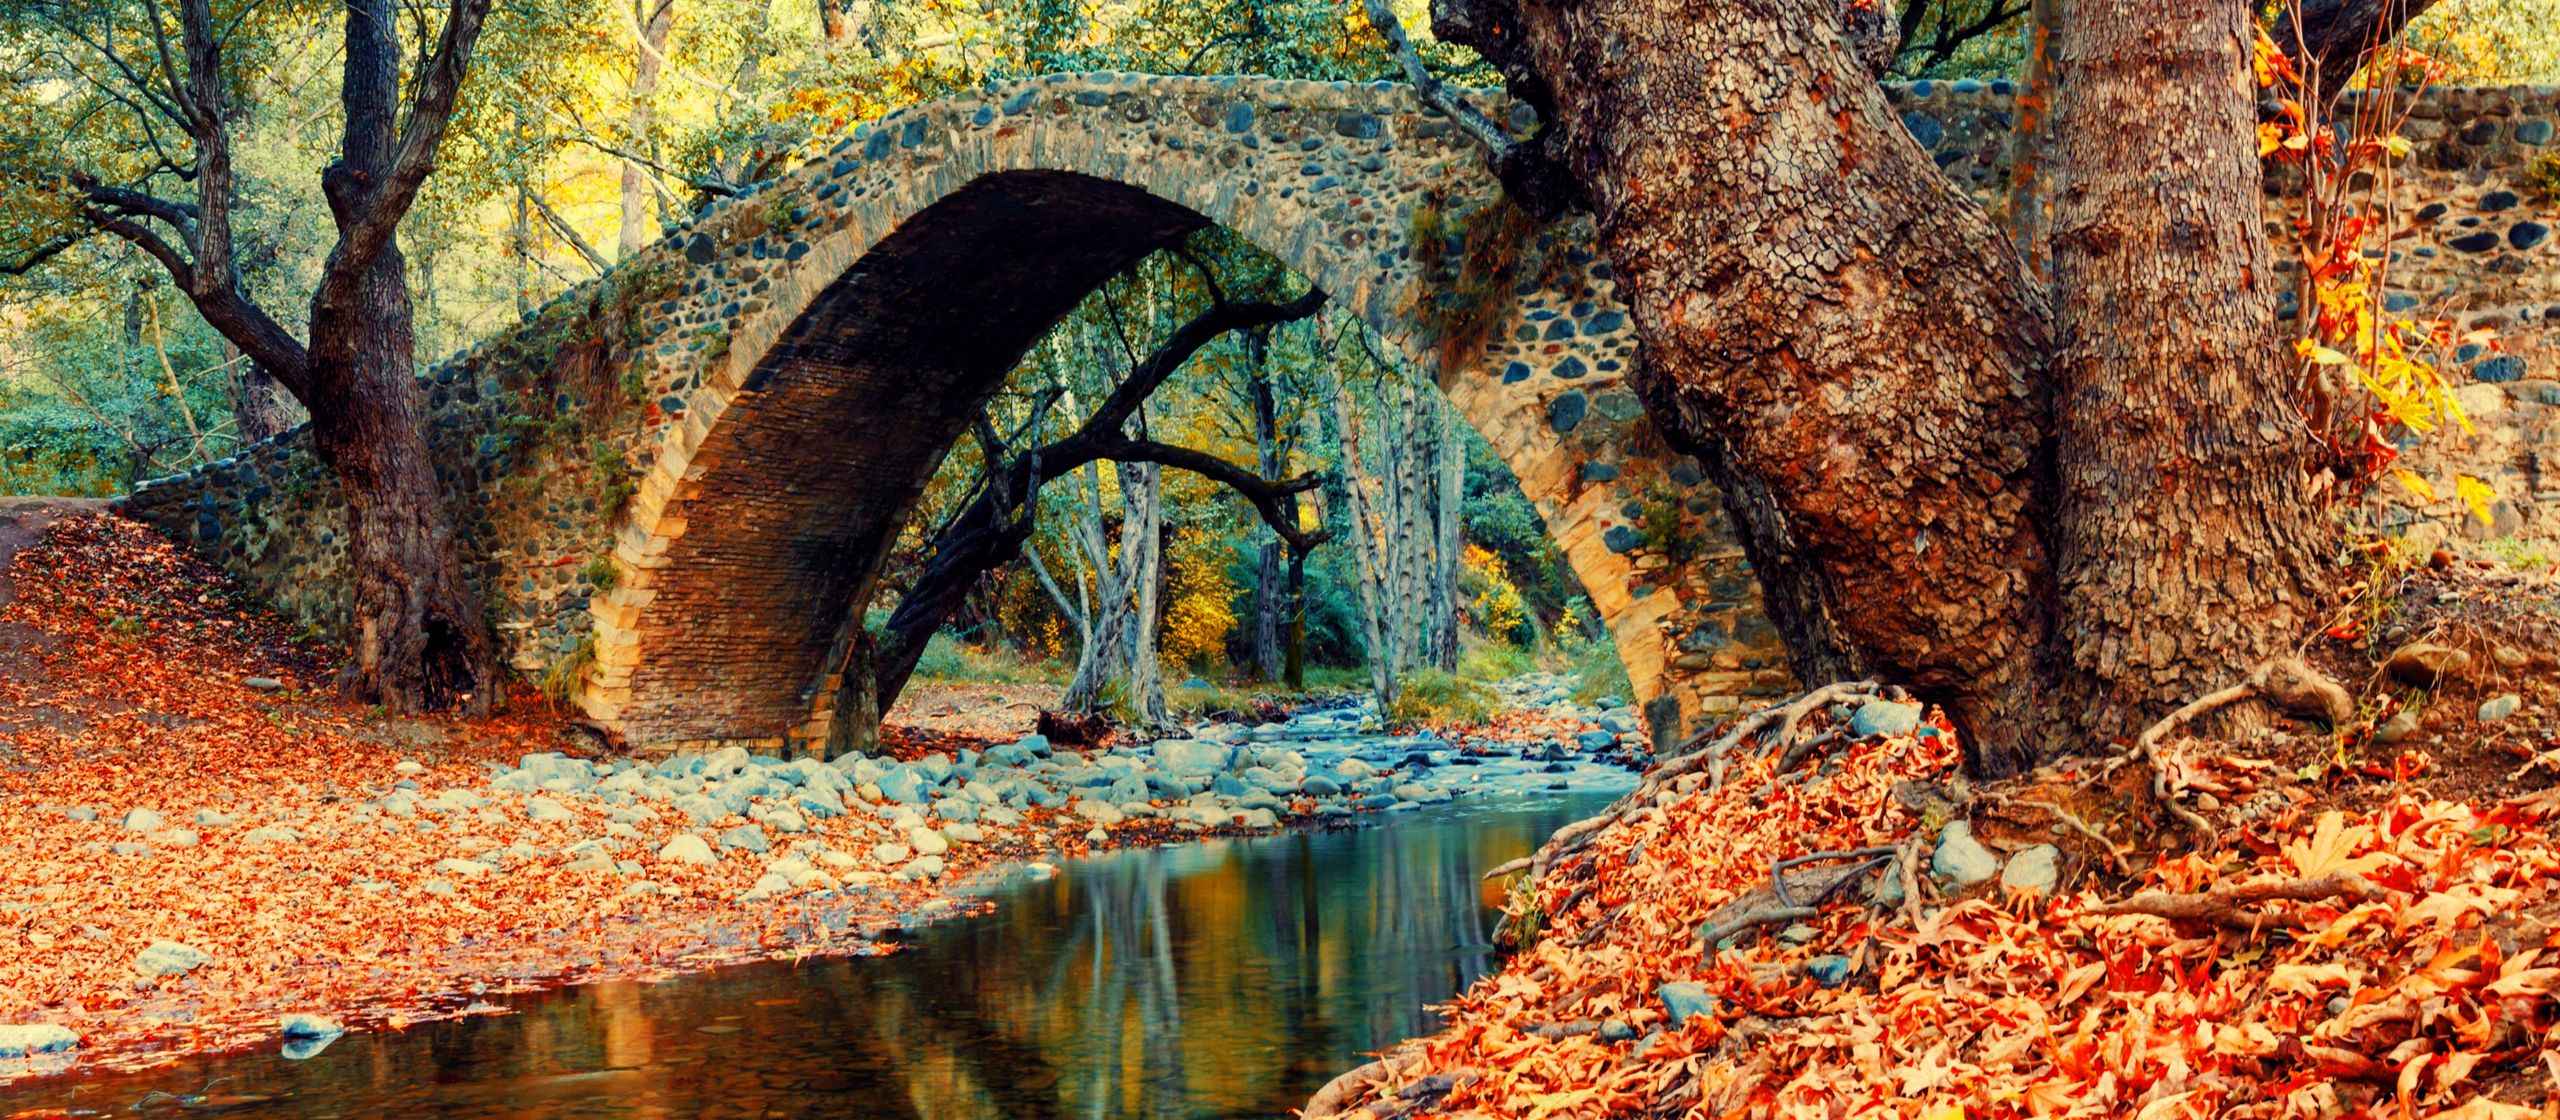 5 Places in Cyprus to see autumn coloursin Cyprus